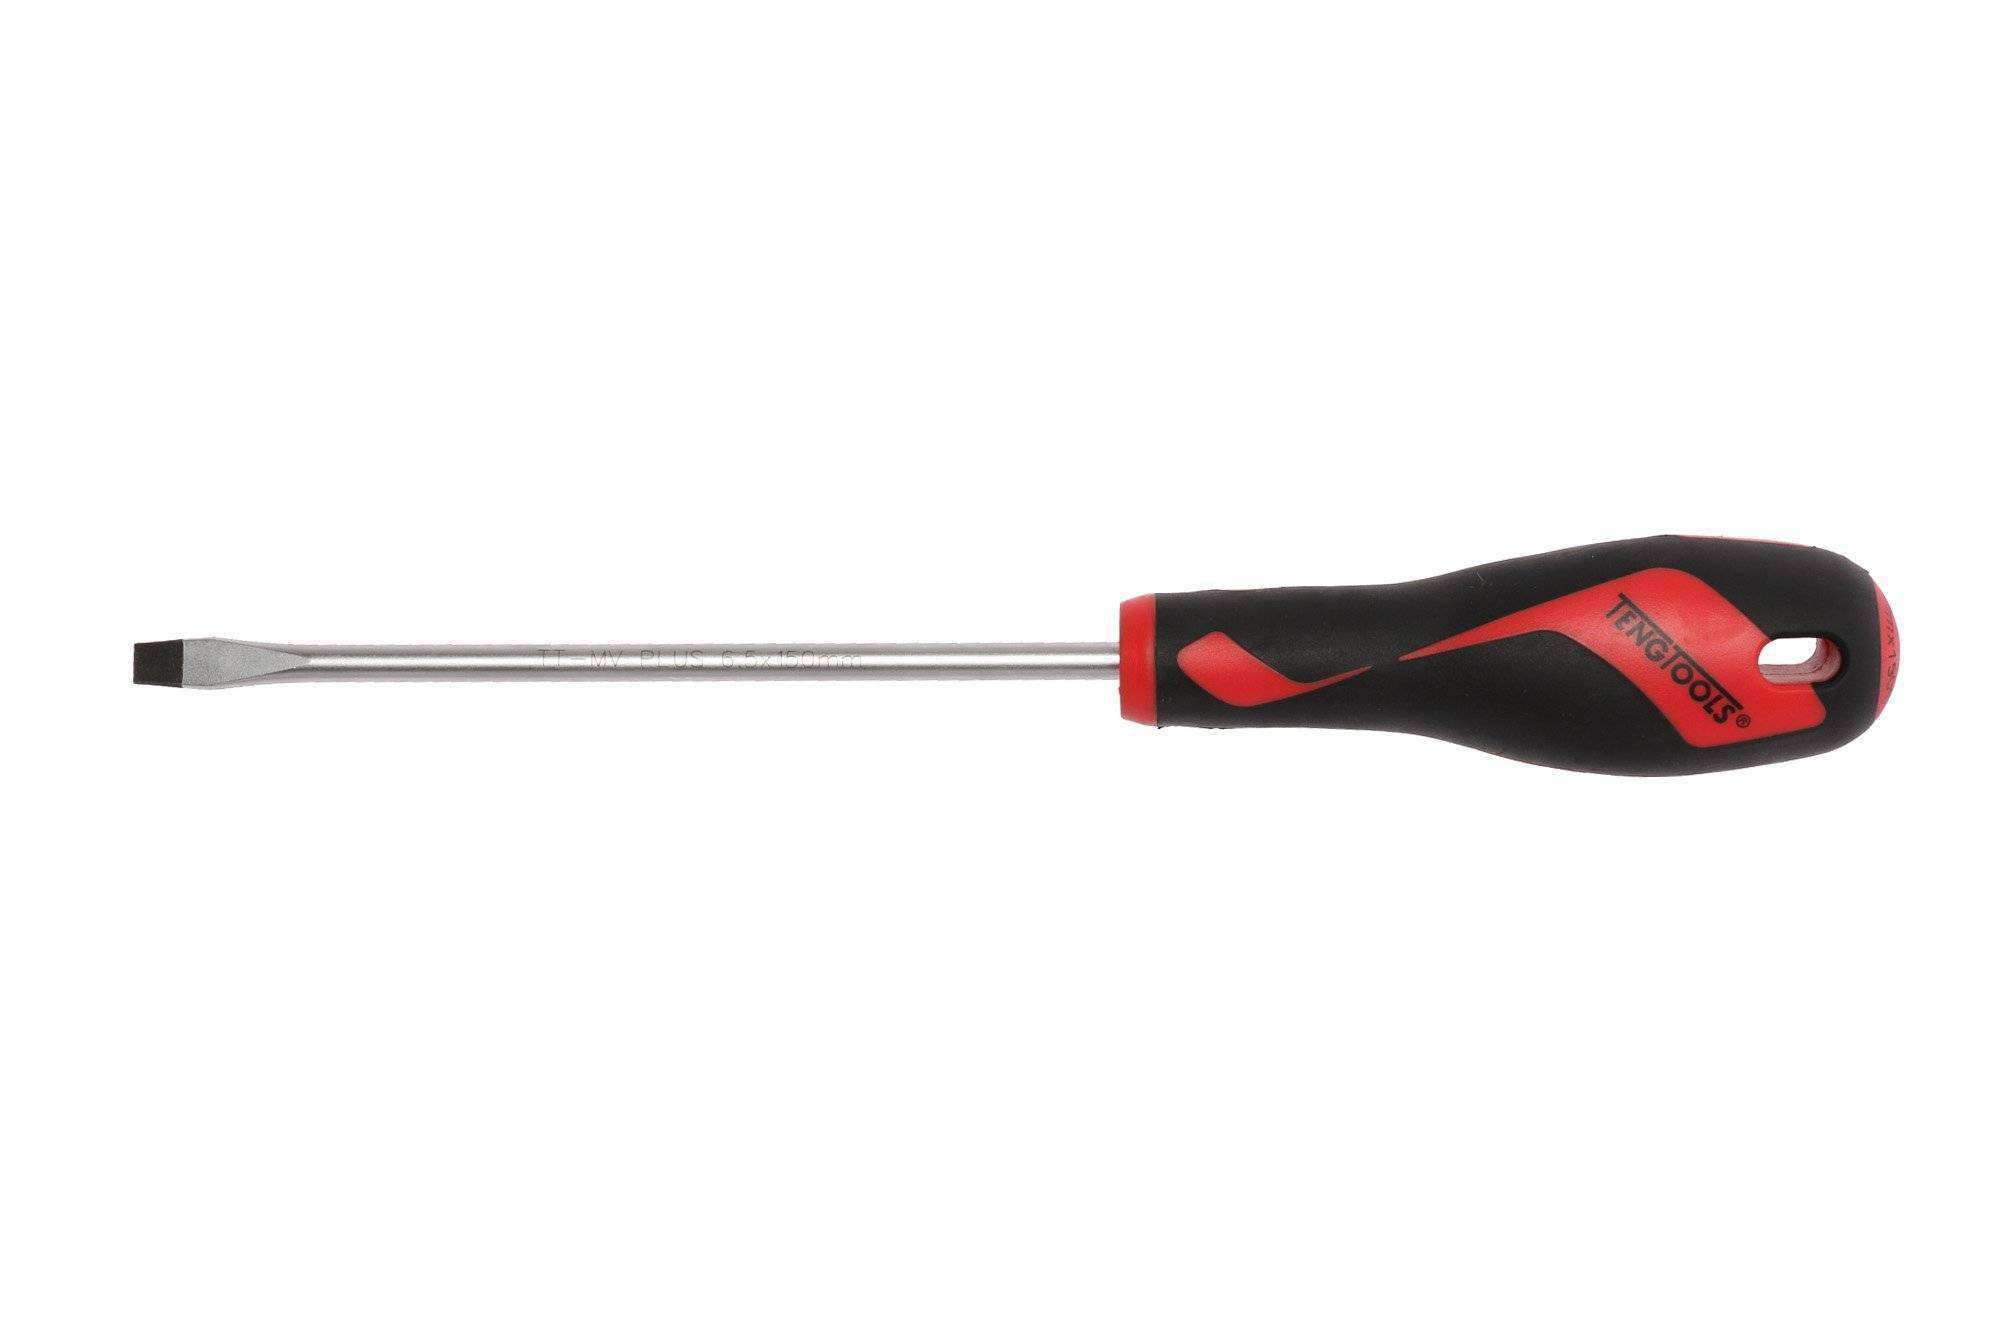 Teng Tools 6.5mm / 1/4 Inch x 150mm / 5.9 Inch Long Flat Type Slotted Head Screwdriver - MD928N2